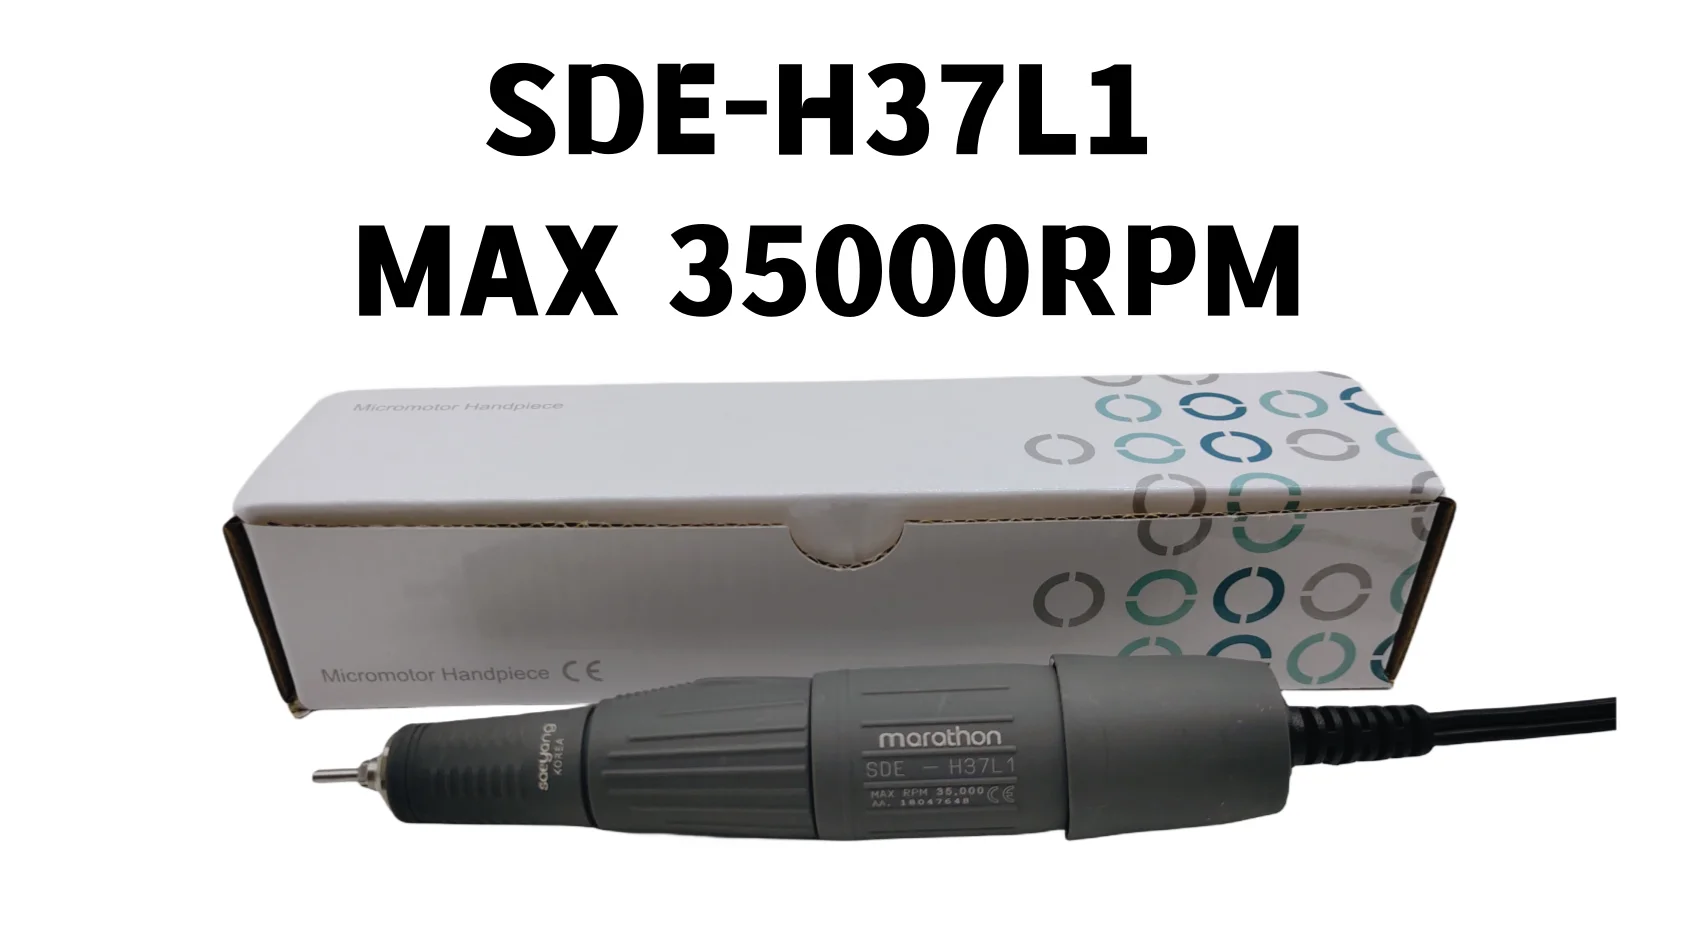 

35K SED-H37L1 Micromotor Handle Is Used For Strong 210 211 90 204 Marathon Control Box Electric Manicure Drill Nail